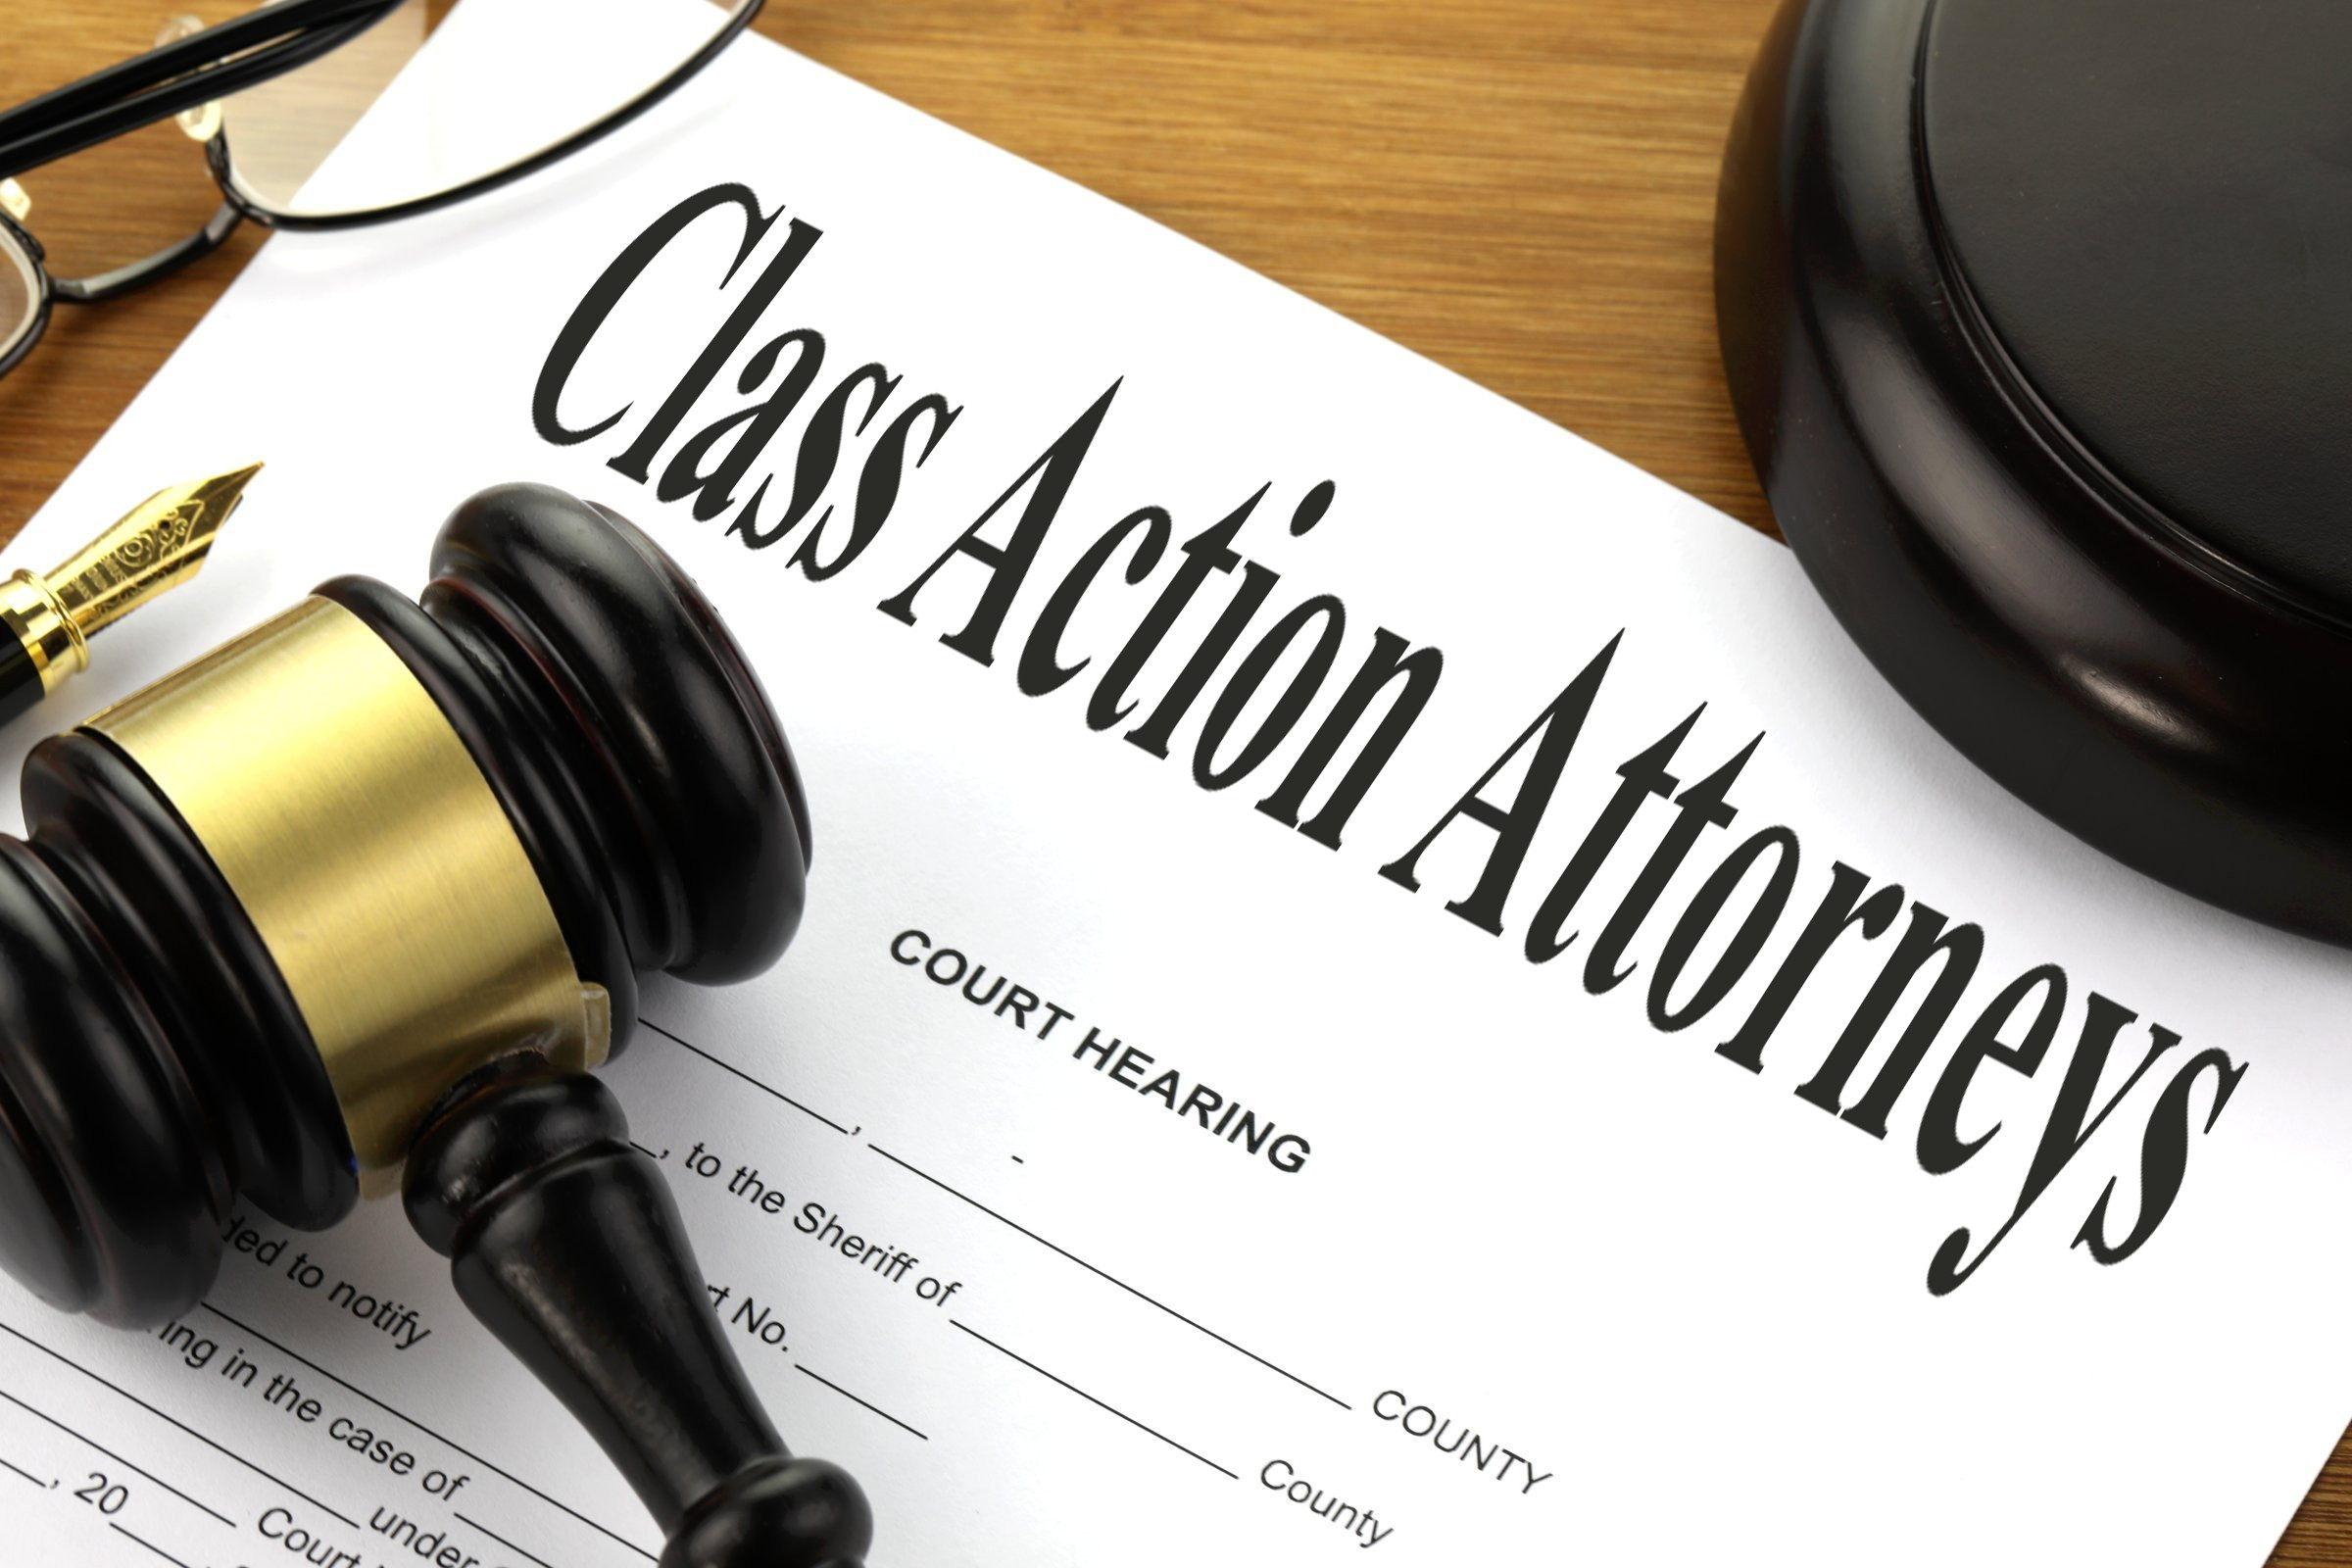 class action attorneys